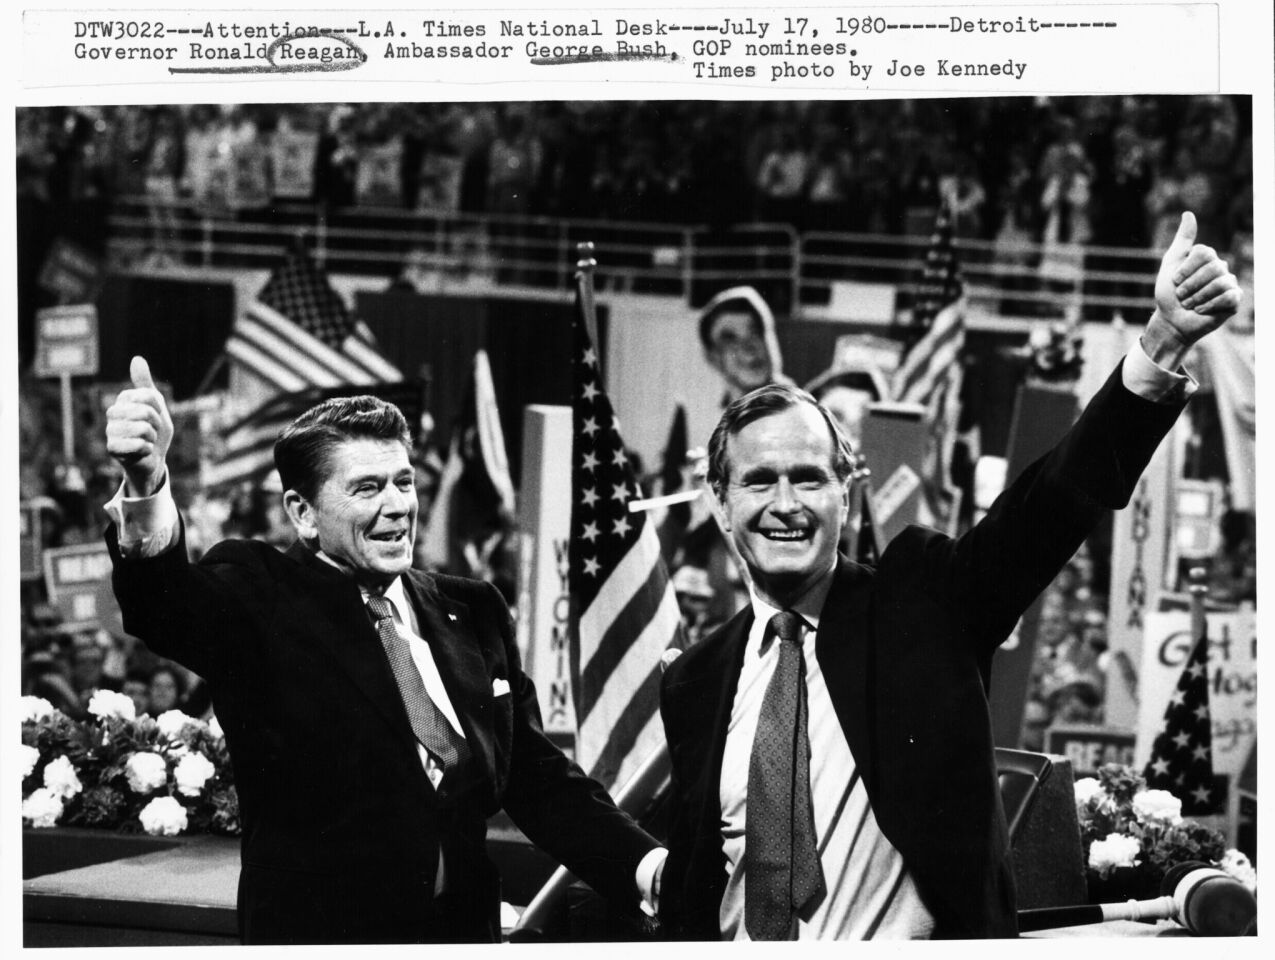 Ronald Reagan and George H.W. Bush celebrate after receiving the nominations for president and vice president at the Republican National Convention in Detroit in 1980.